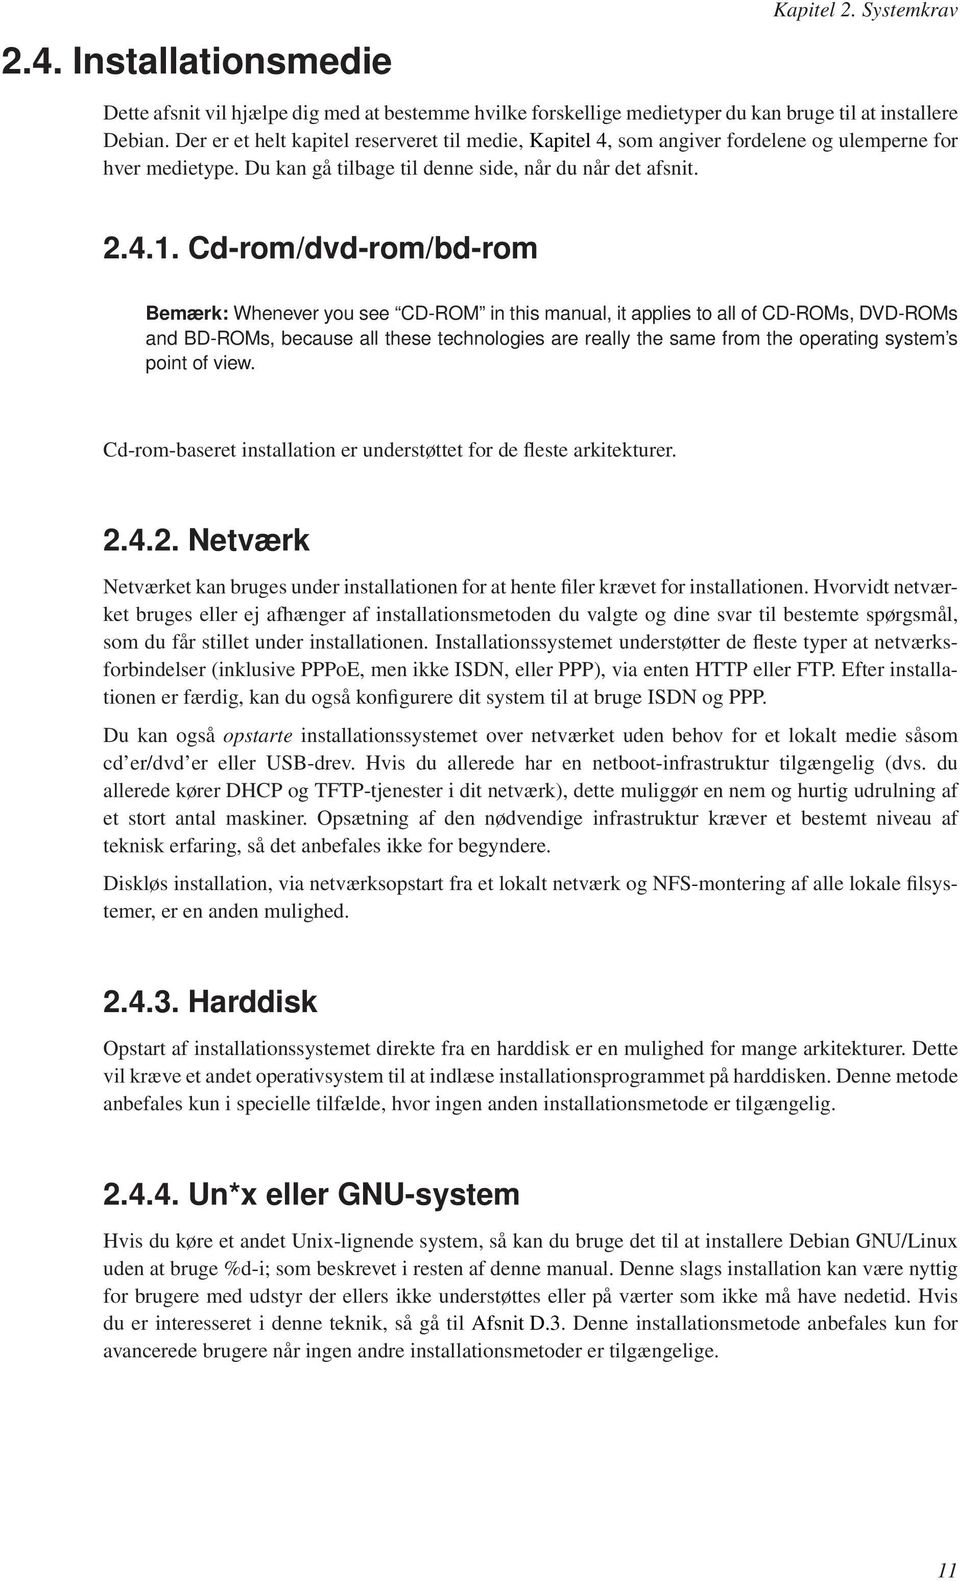 Cd-rom/dvd-rom/bd-rom Bemærk: Whenever you see CD-ROM in this manual, it applies to all of CD-ROMs, DVD-ROMs and BD-ROMs, because all these technologies are really the same from the operating system